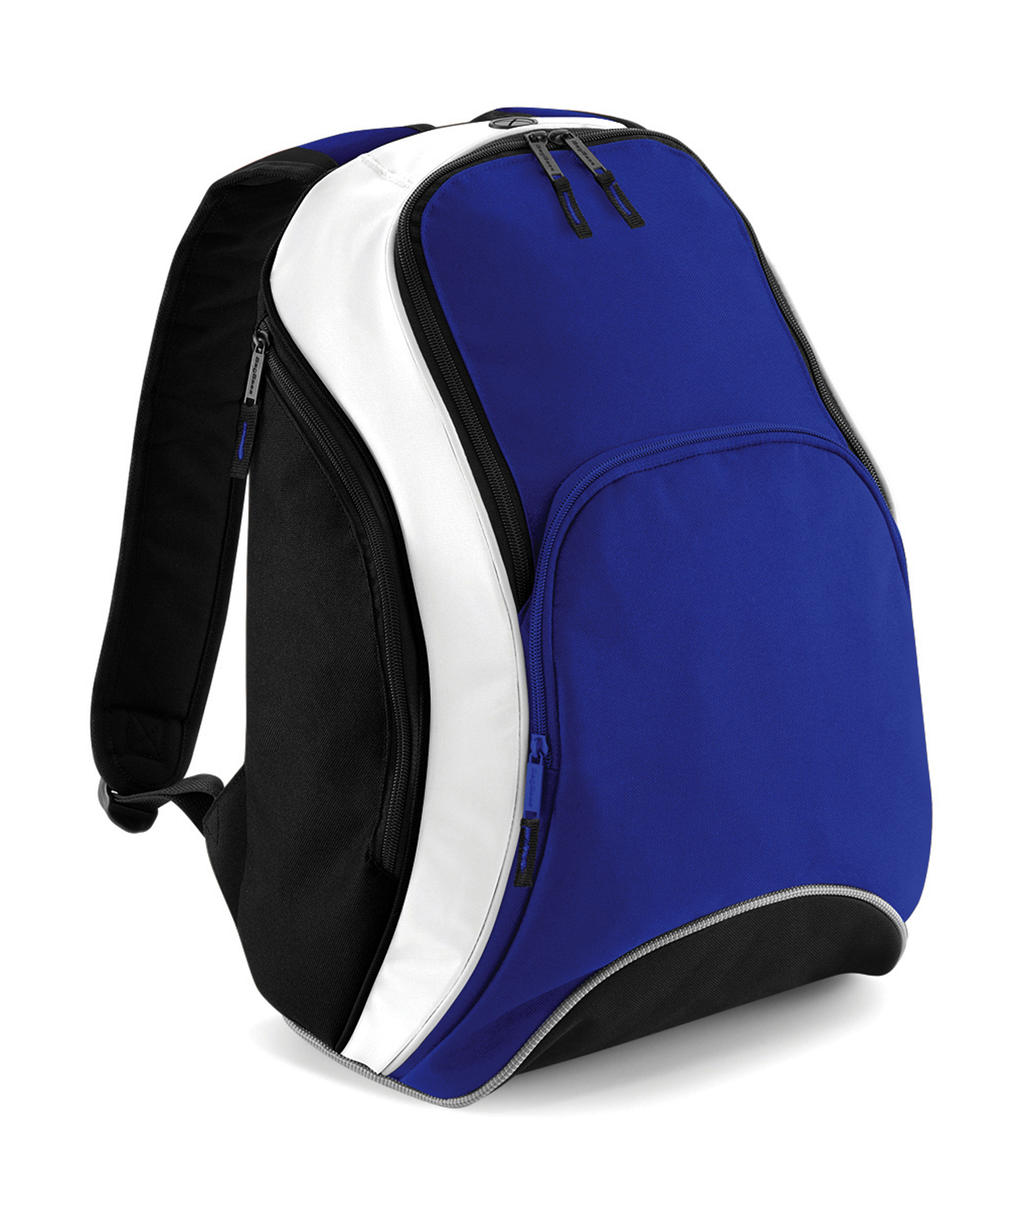  Teamwear Backpack in Farbe Bright Royal/Black/White